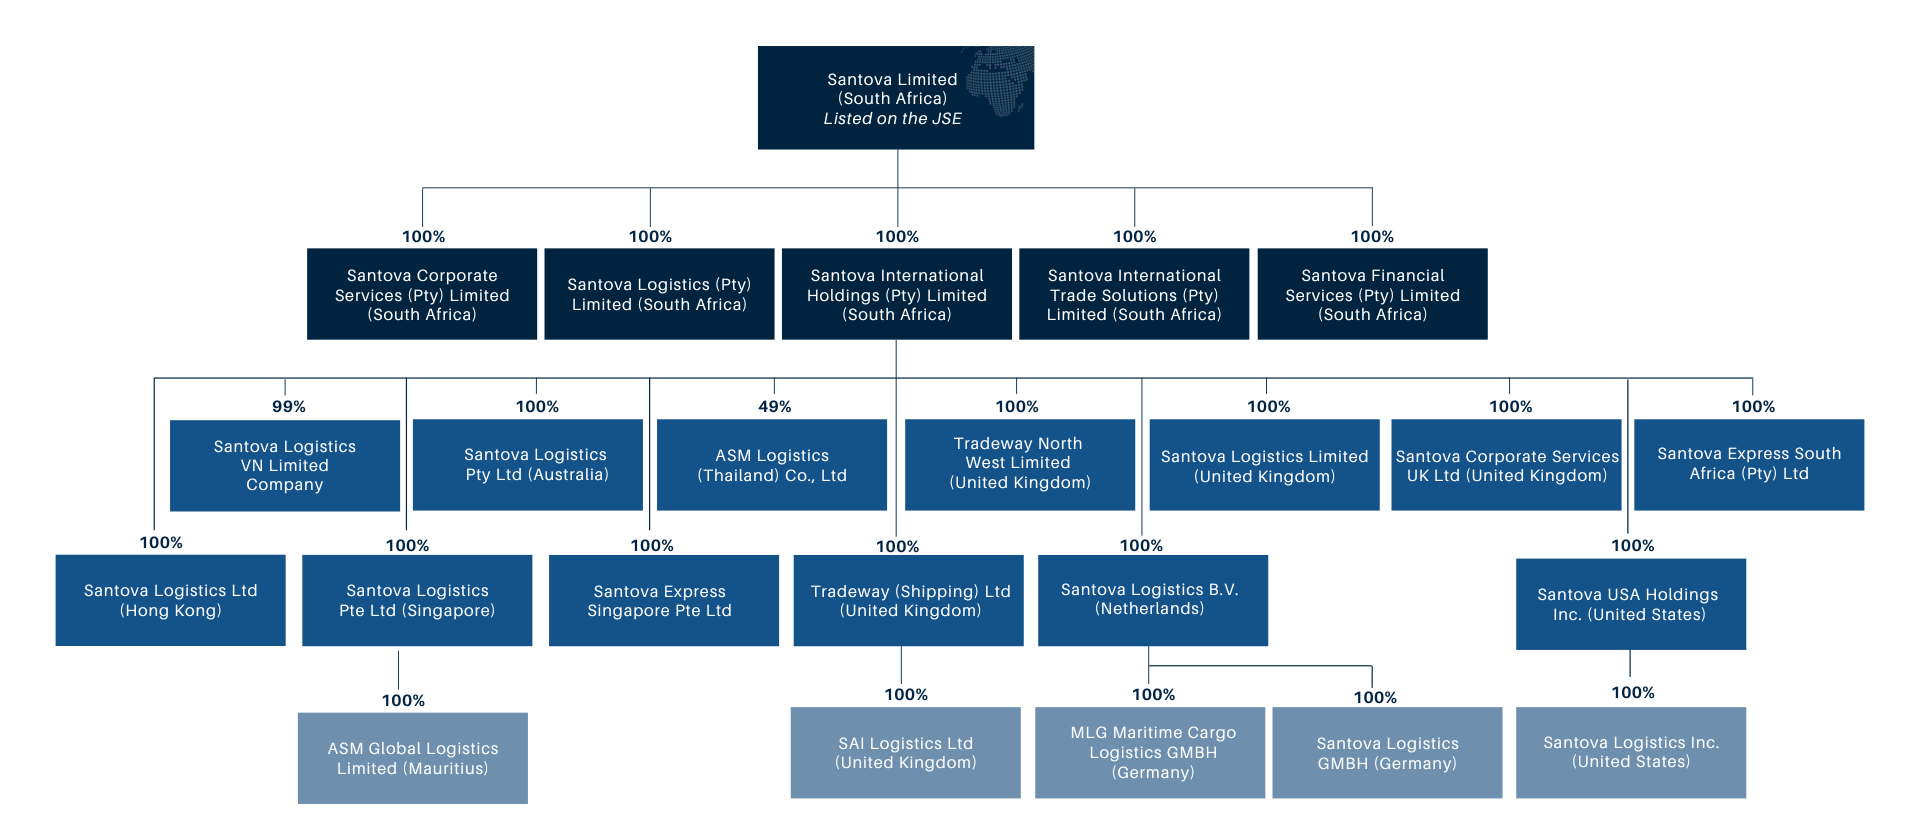 Diagram of Santova Group Corporate Structure and Subsidiaries